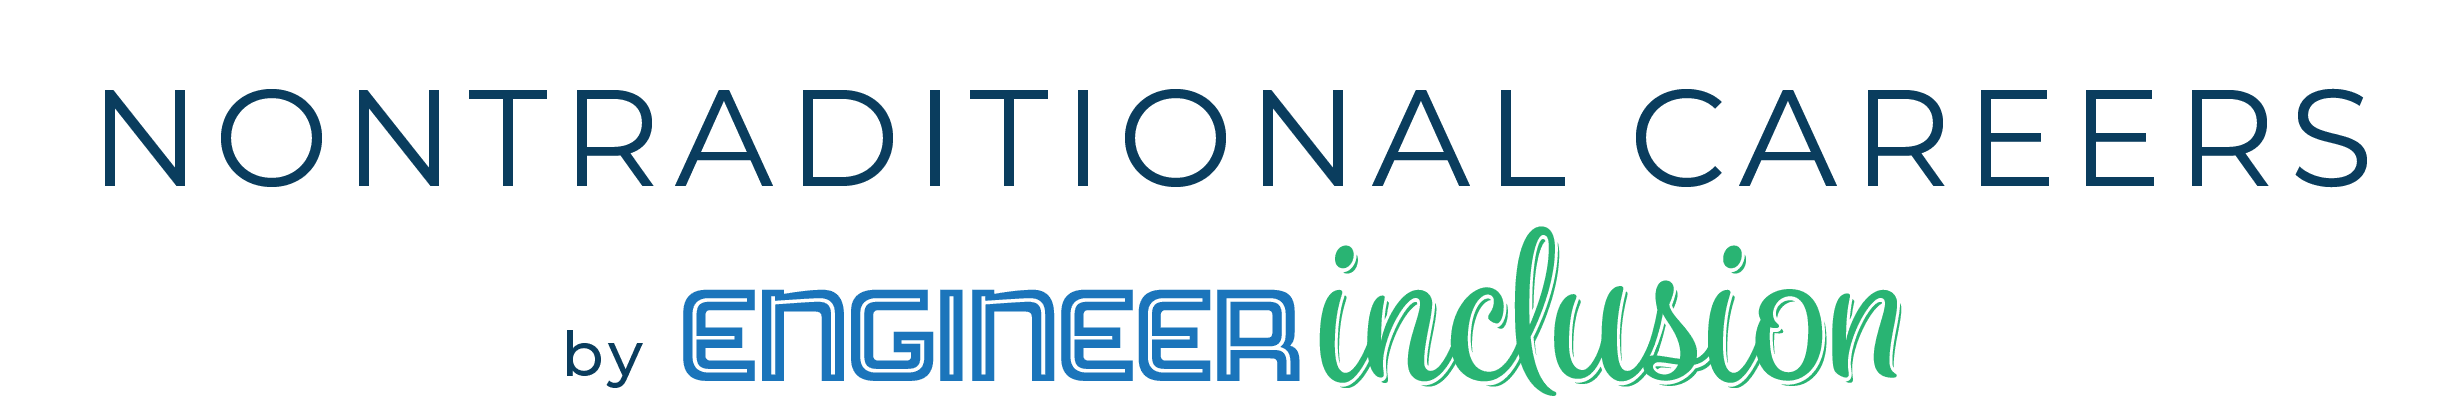 Nontraditional Careers by Engineer Inclusion